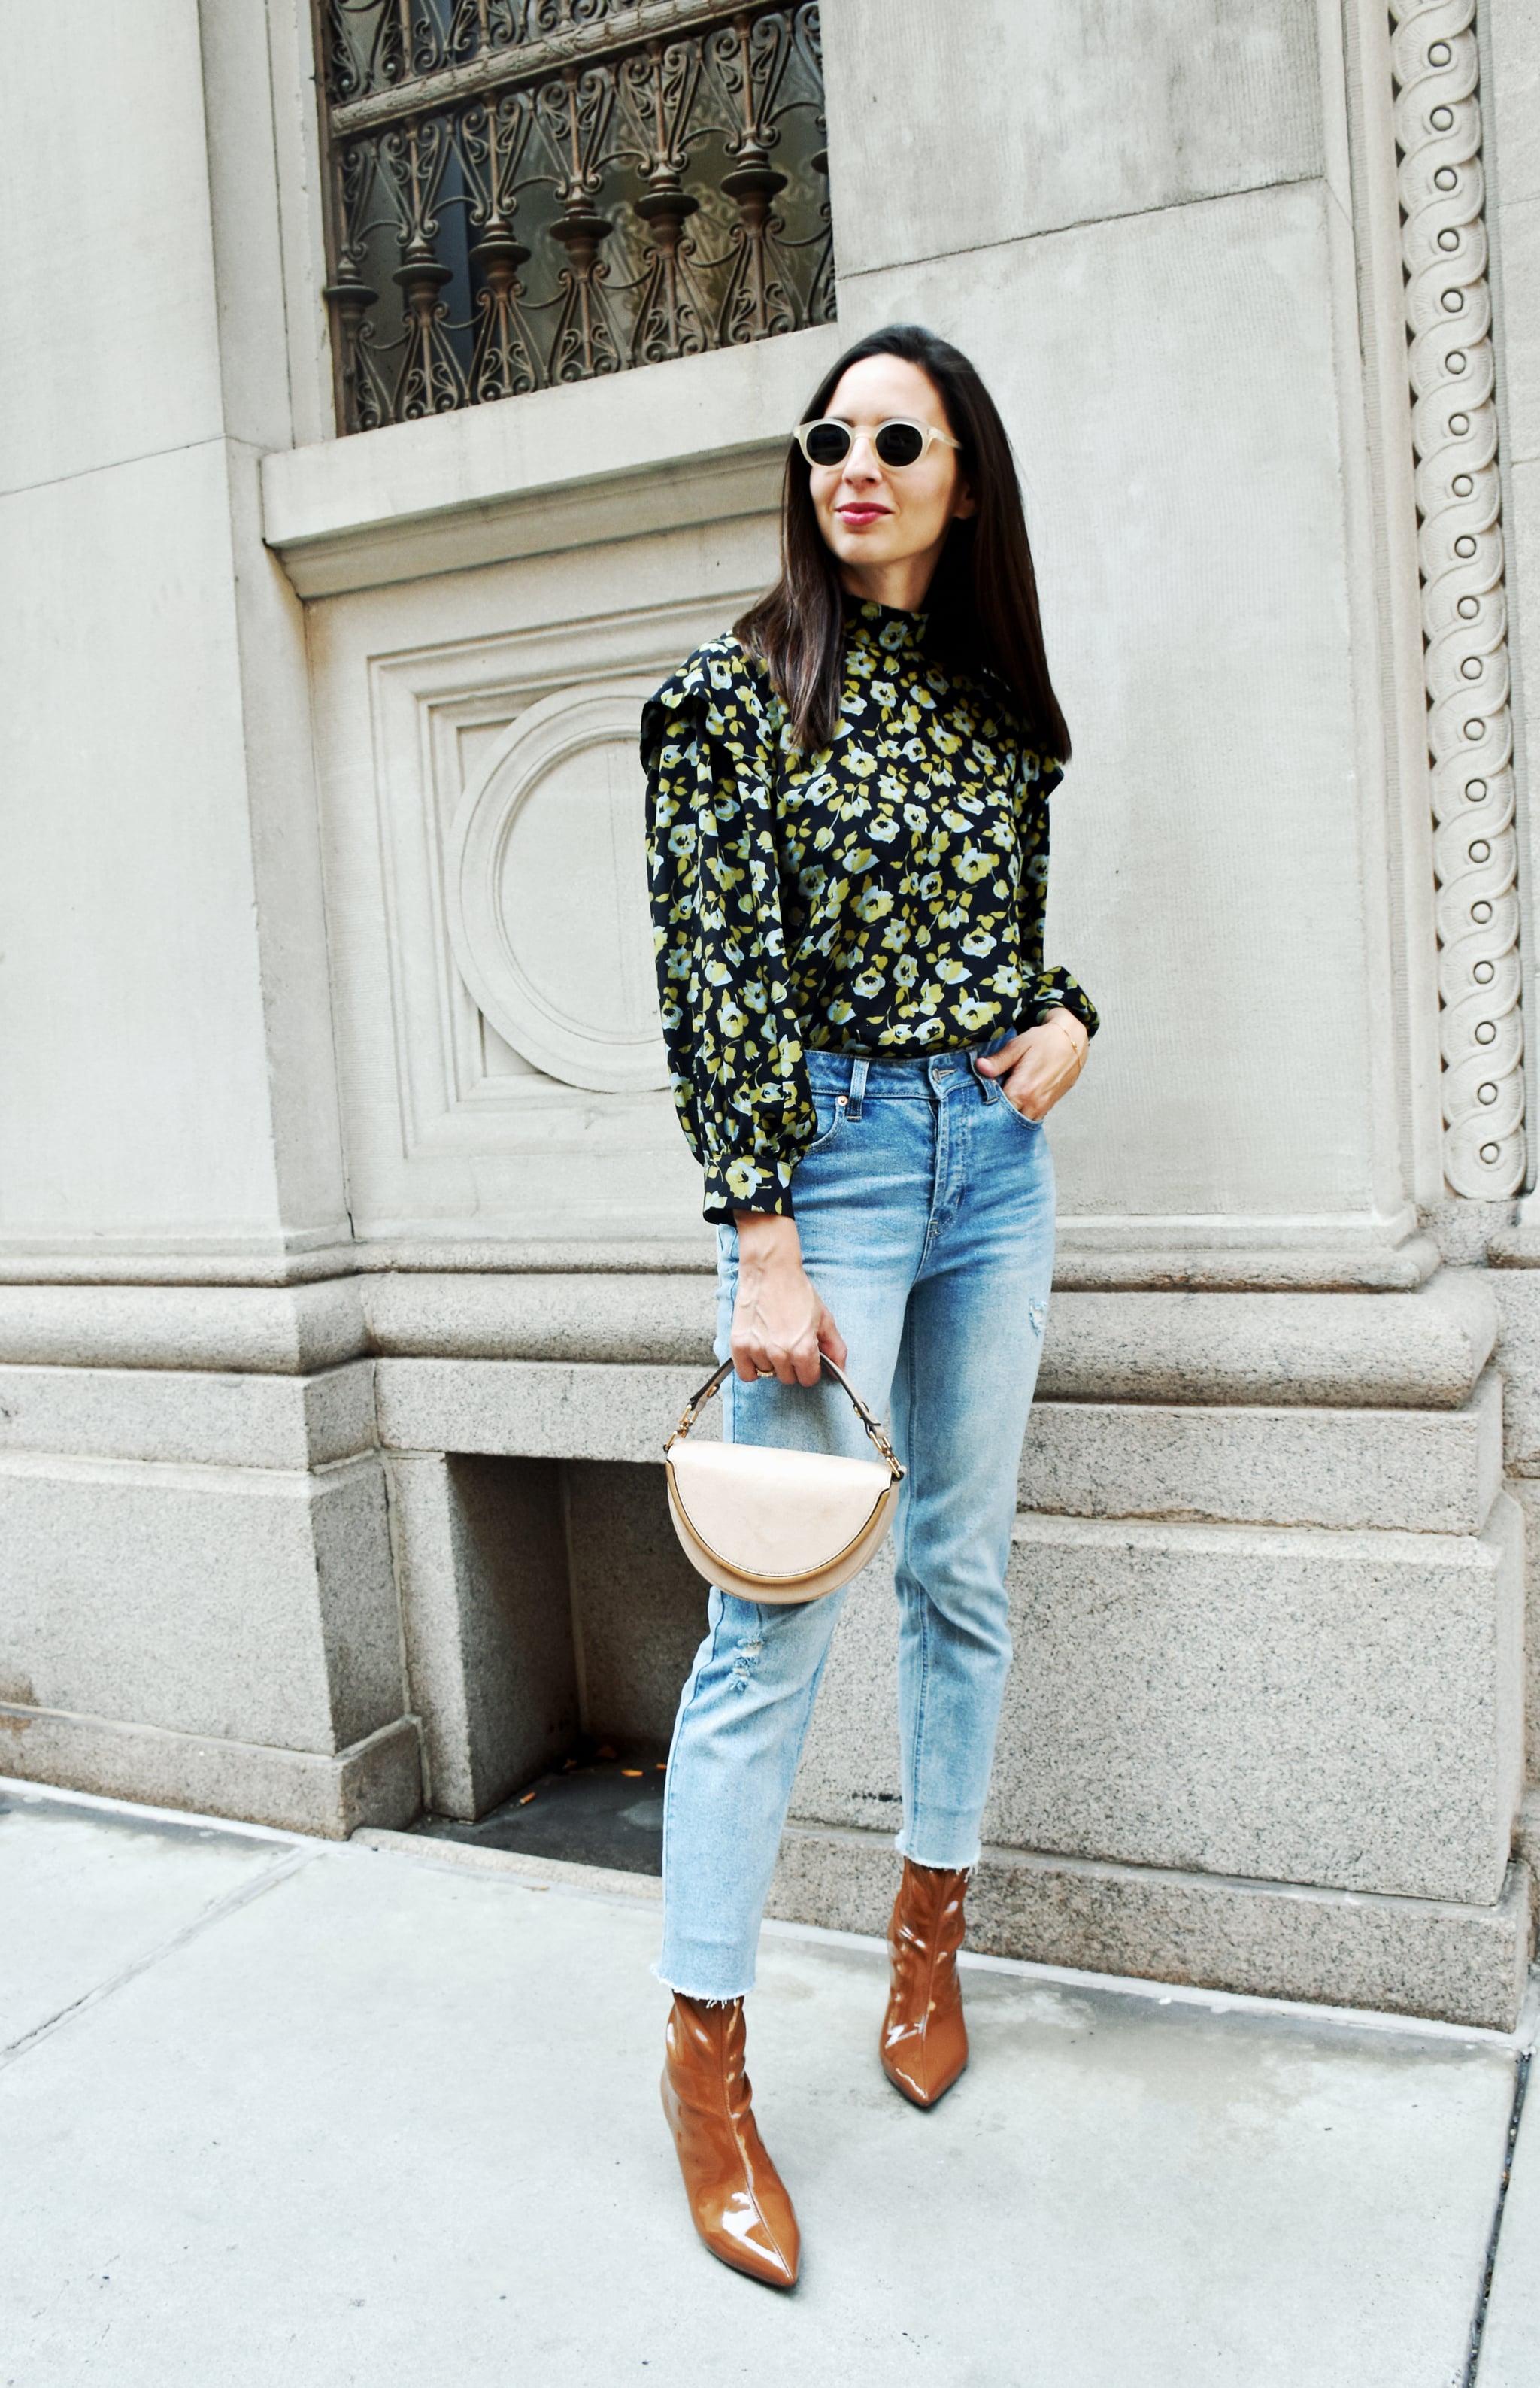 Easy Outfit Ideas: A Top, Jeans, and 